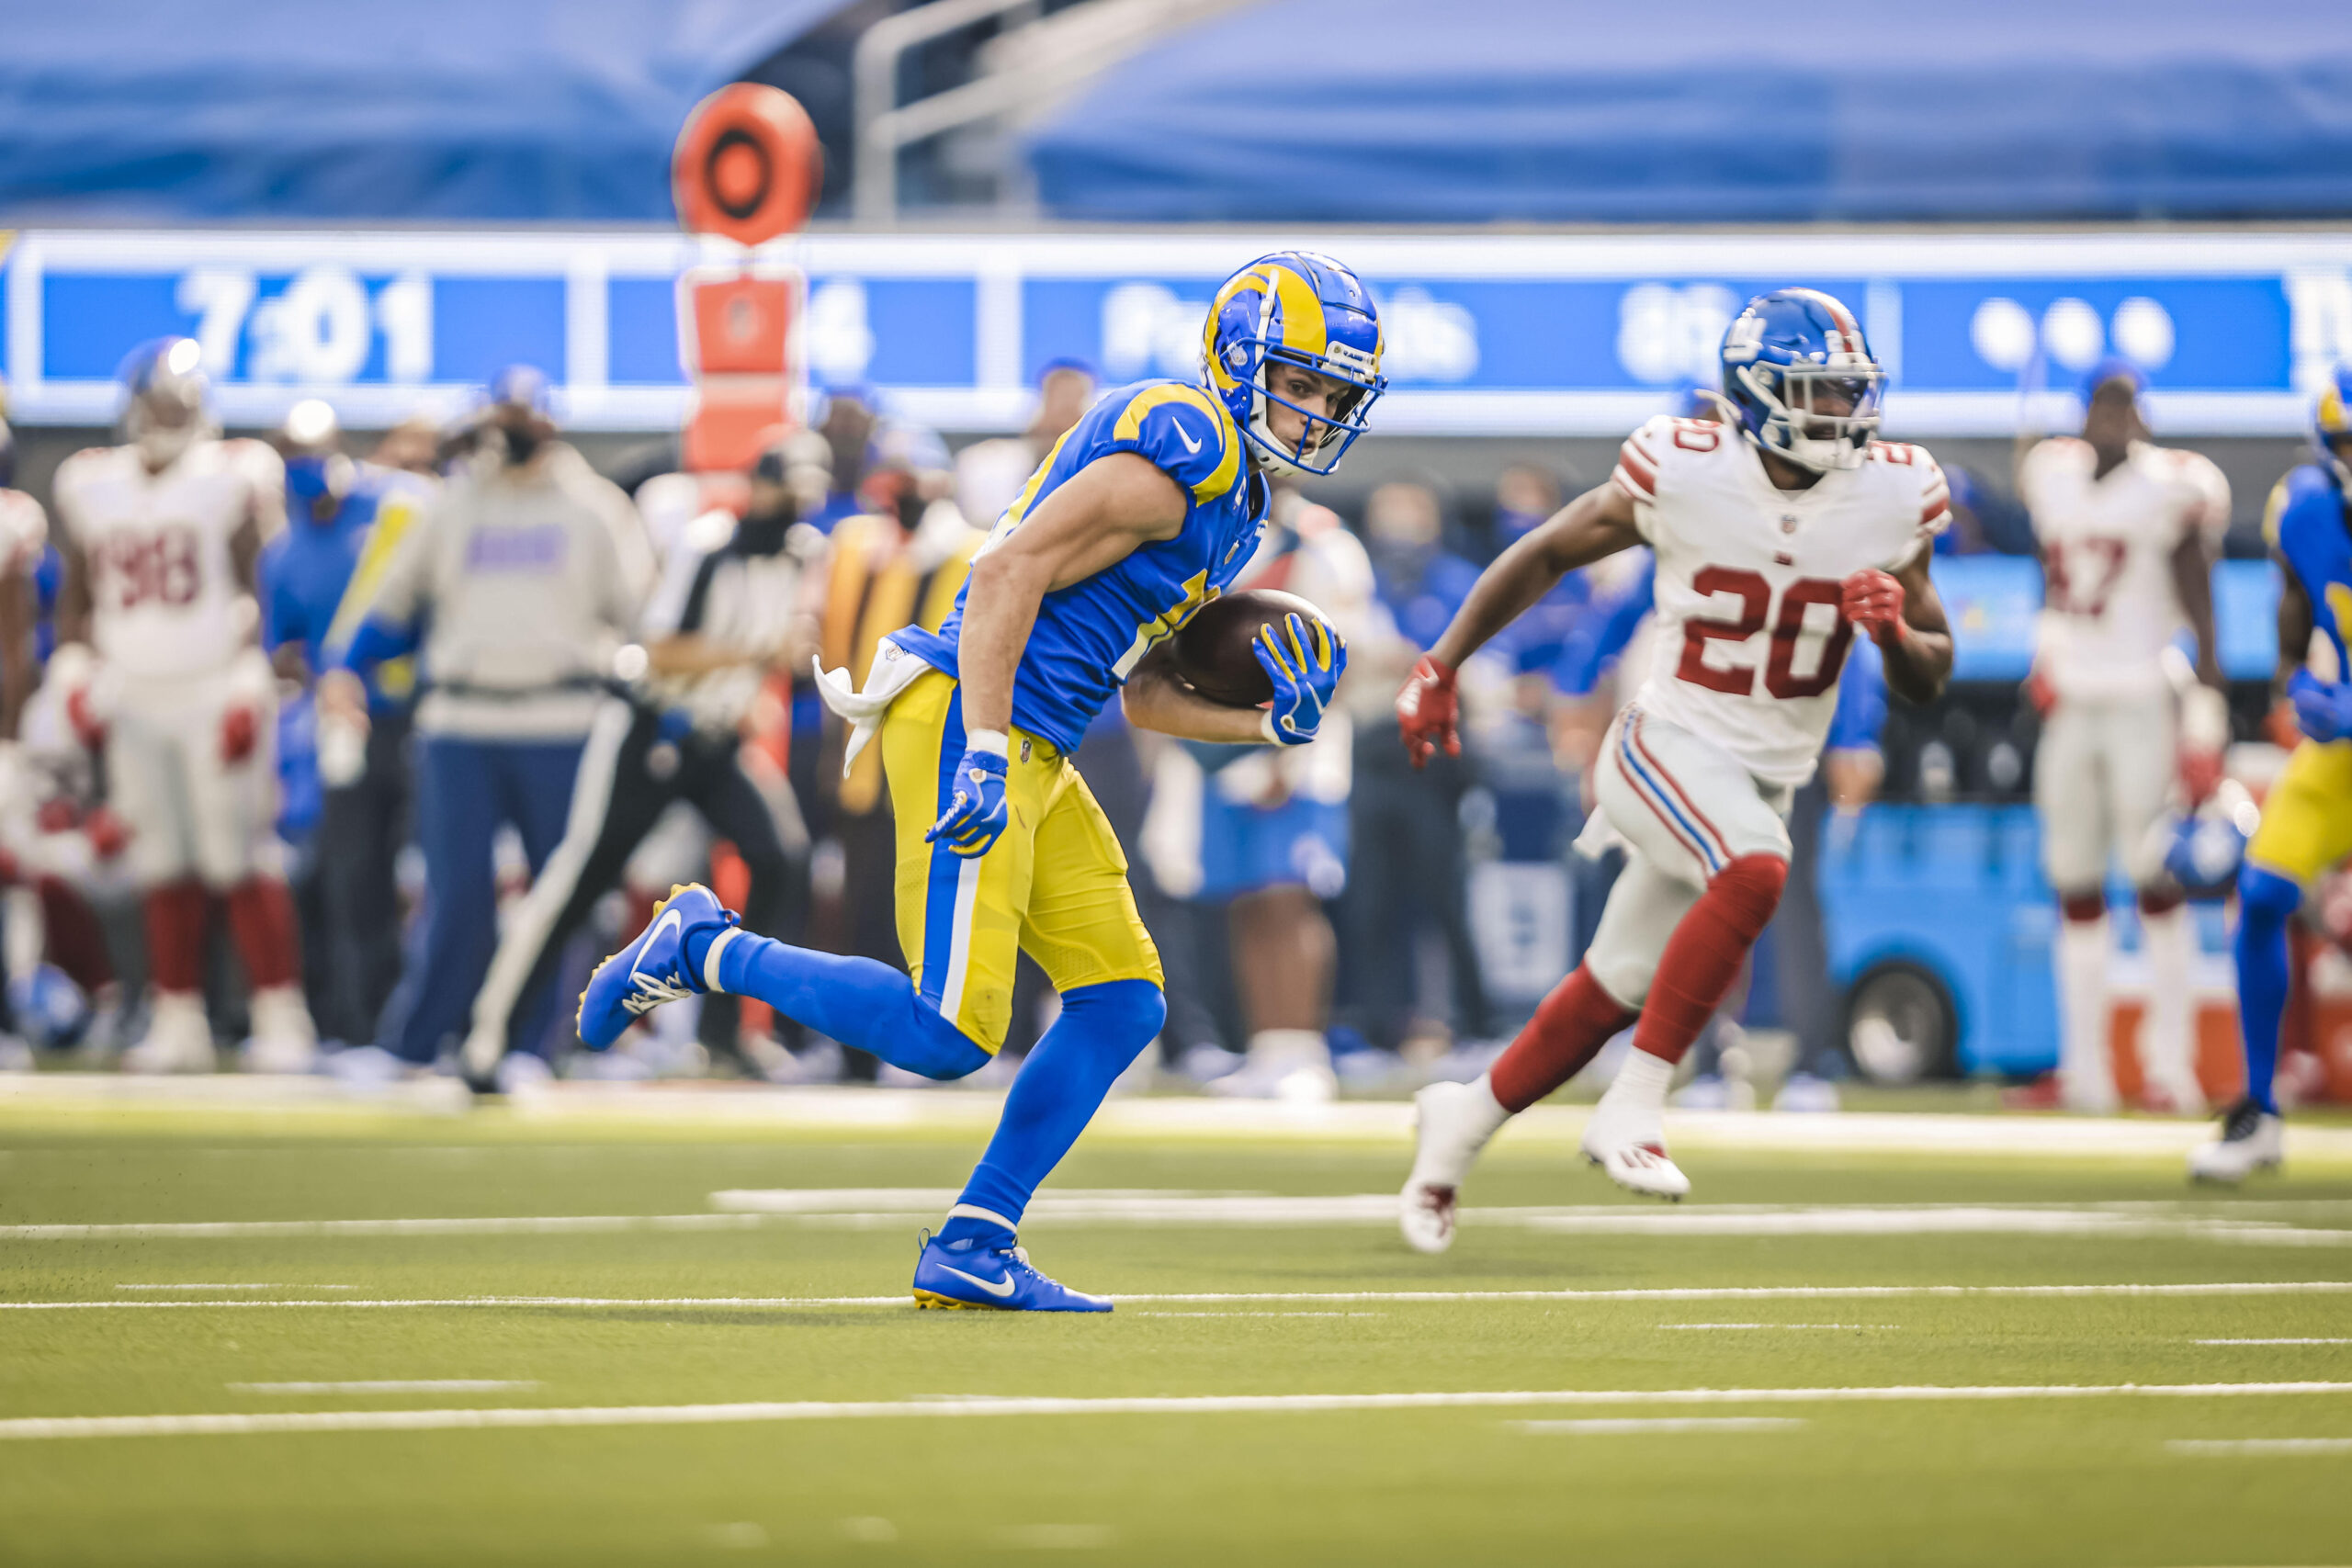 GET ON THE HORN: Rams Hang on Despite Lackluster Performance